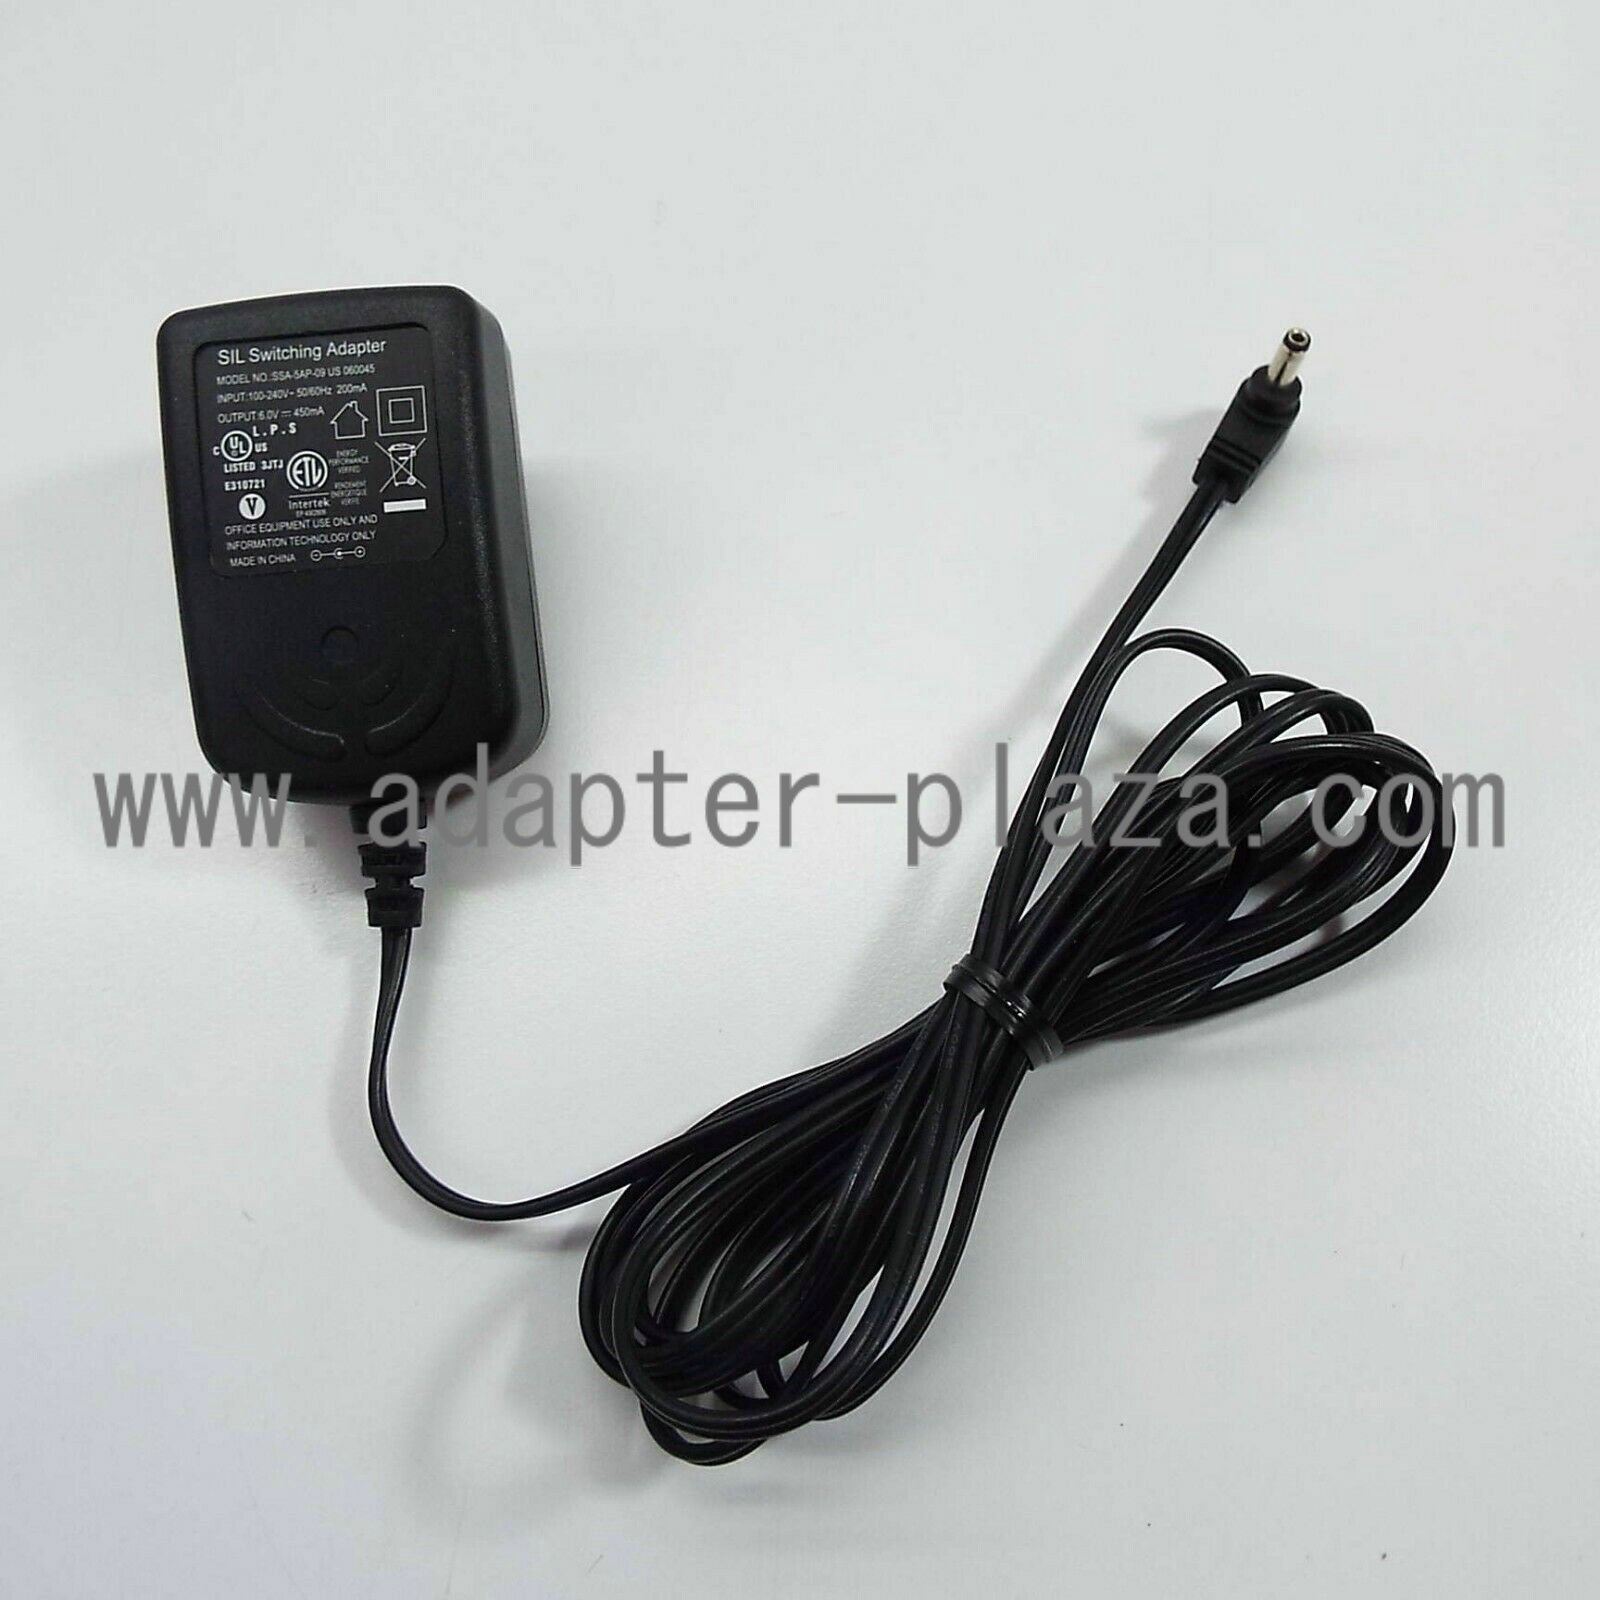 *Brand NEW* SIL SSA-5AP-09 US 060045 6.0V 450mA AC DC Adapter POWER SUPPLY